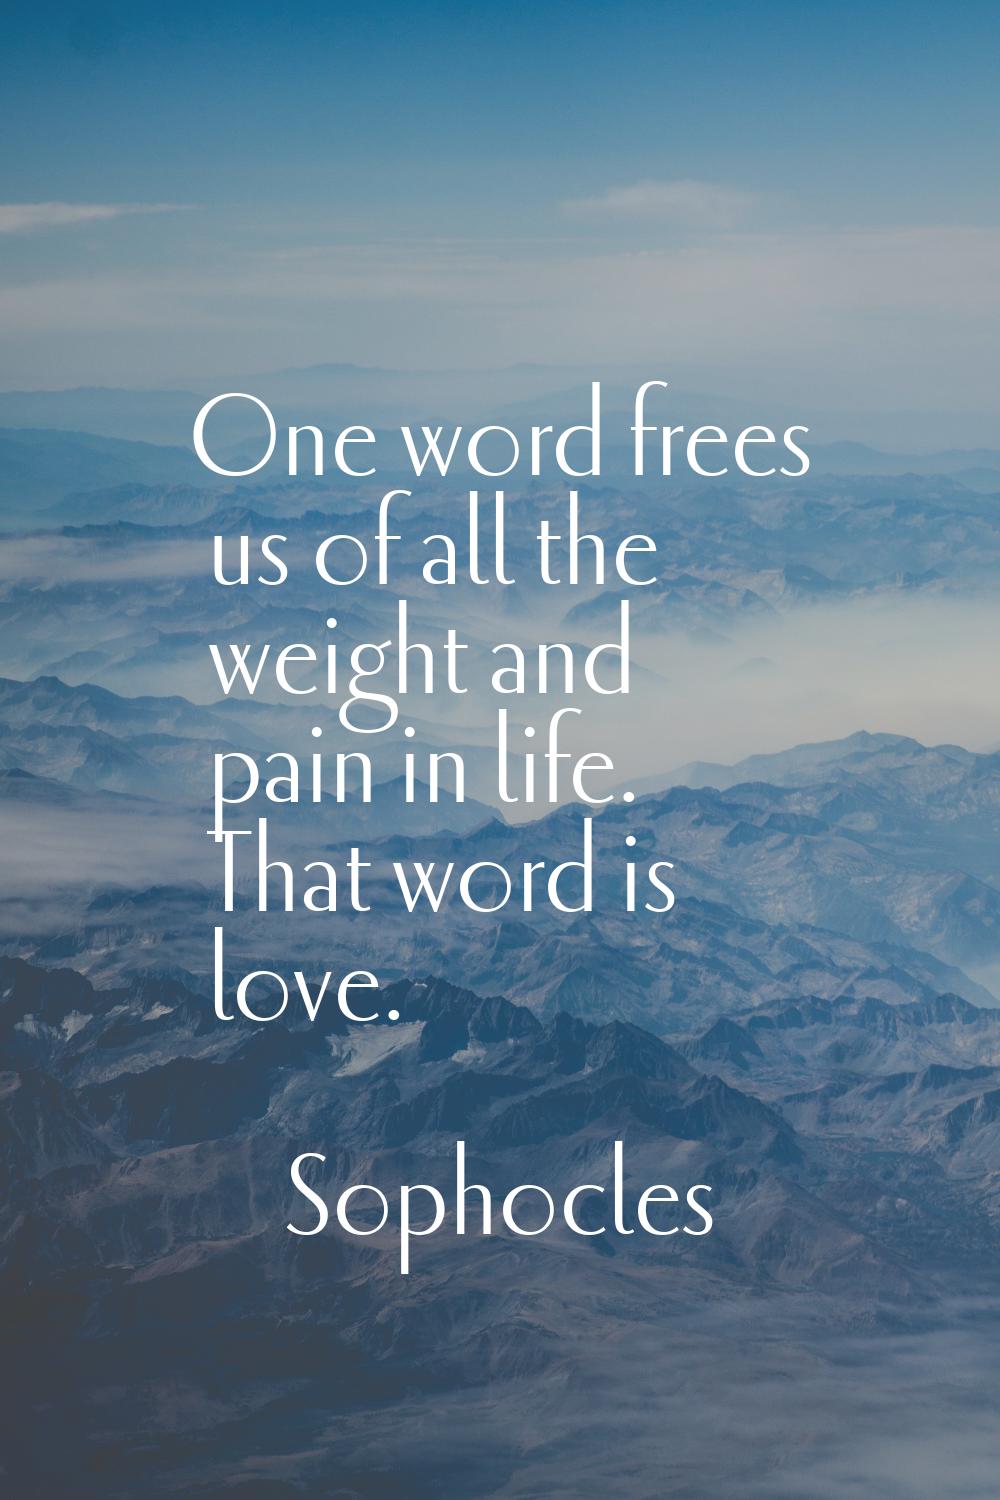 One word frees us of all the weight and pain in life. That word is love.